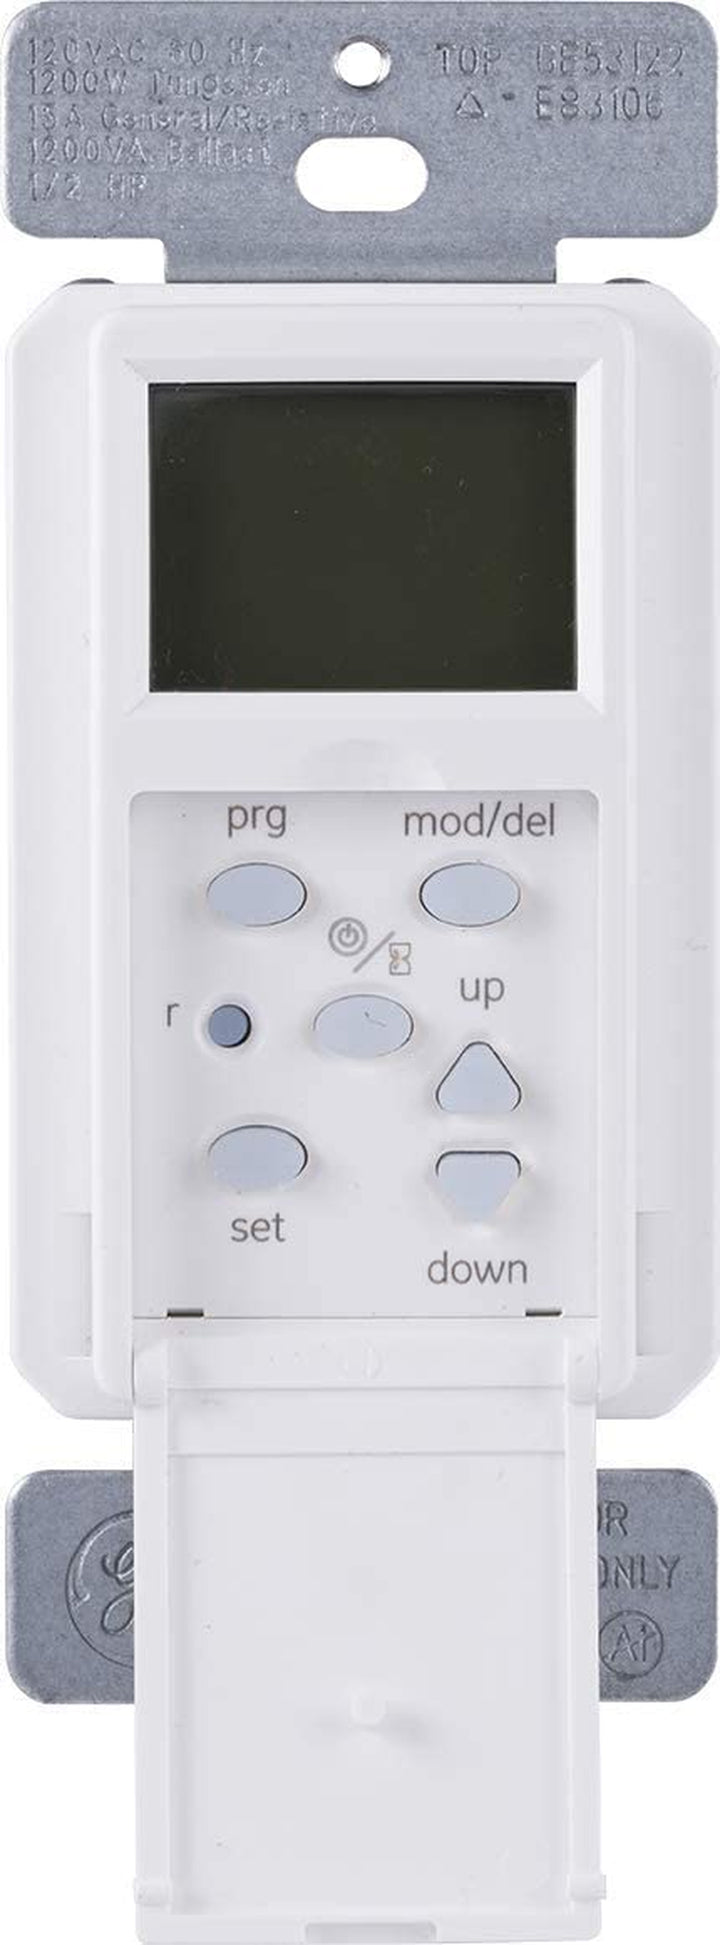 GE Home Electrical Sunsmart In-Wall Digital Timer, Daily On/Off Times, Programmable Settings, Sunset/Sunrise Presets, Vacation Security, White Almond Paddles Included, for Lights, Fans, Heaters 32787